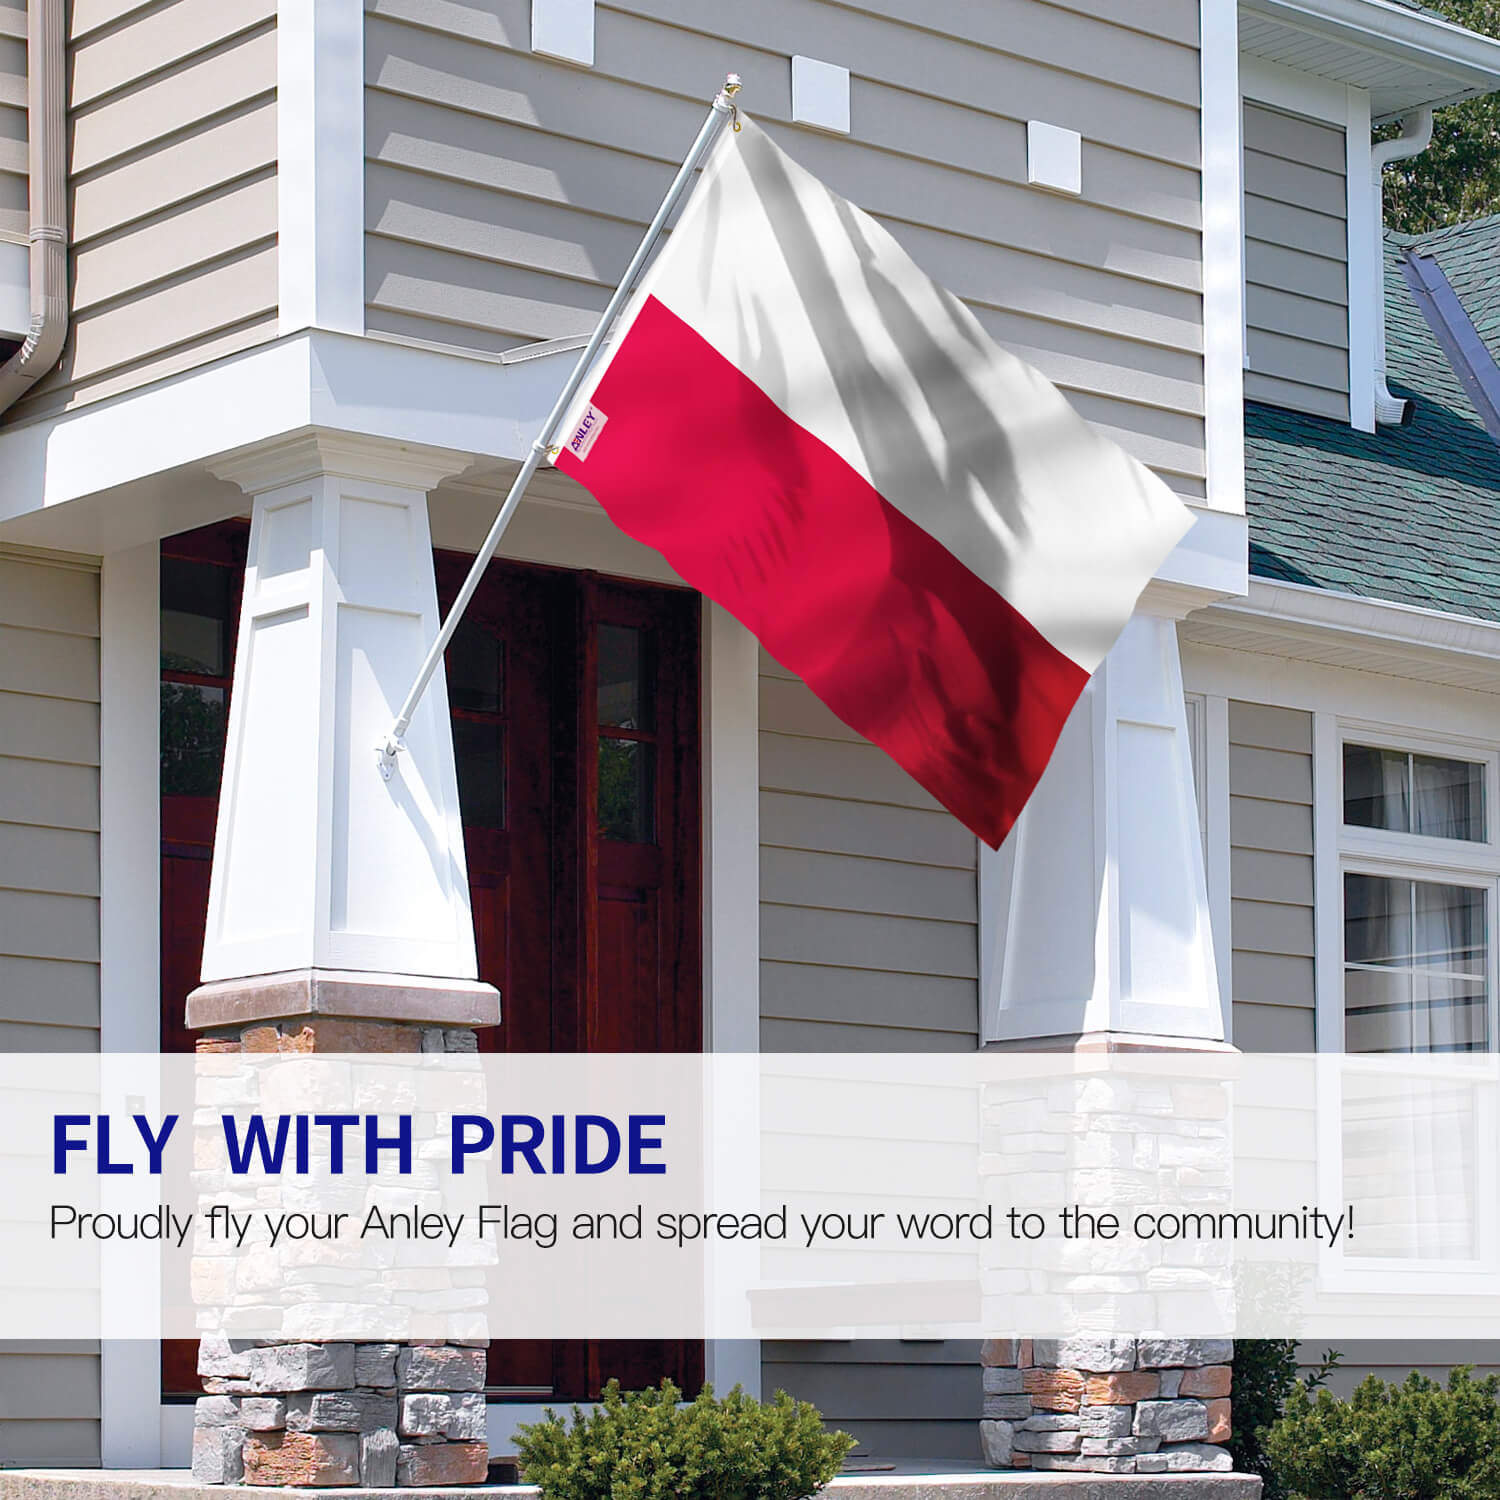 Polish Eagle Flags Polyester with Brass Grommets 3 X 5 Ft Vivid Color and Fade Proof Canvas Header and Double Stitched Anley Fly Breeze 3x5 Foot Poland State Ensign Flag